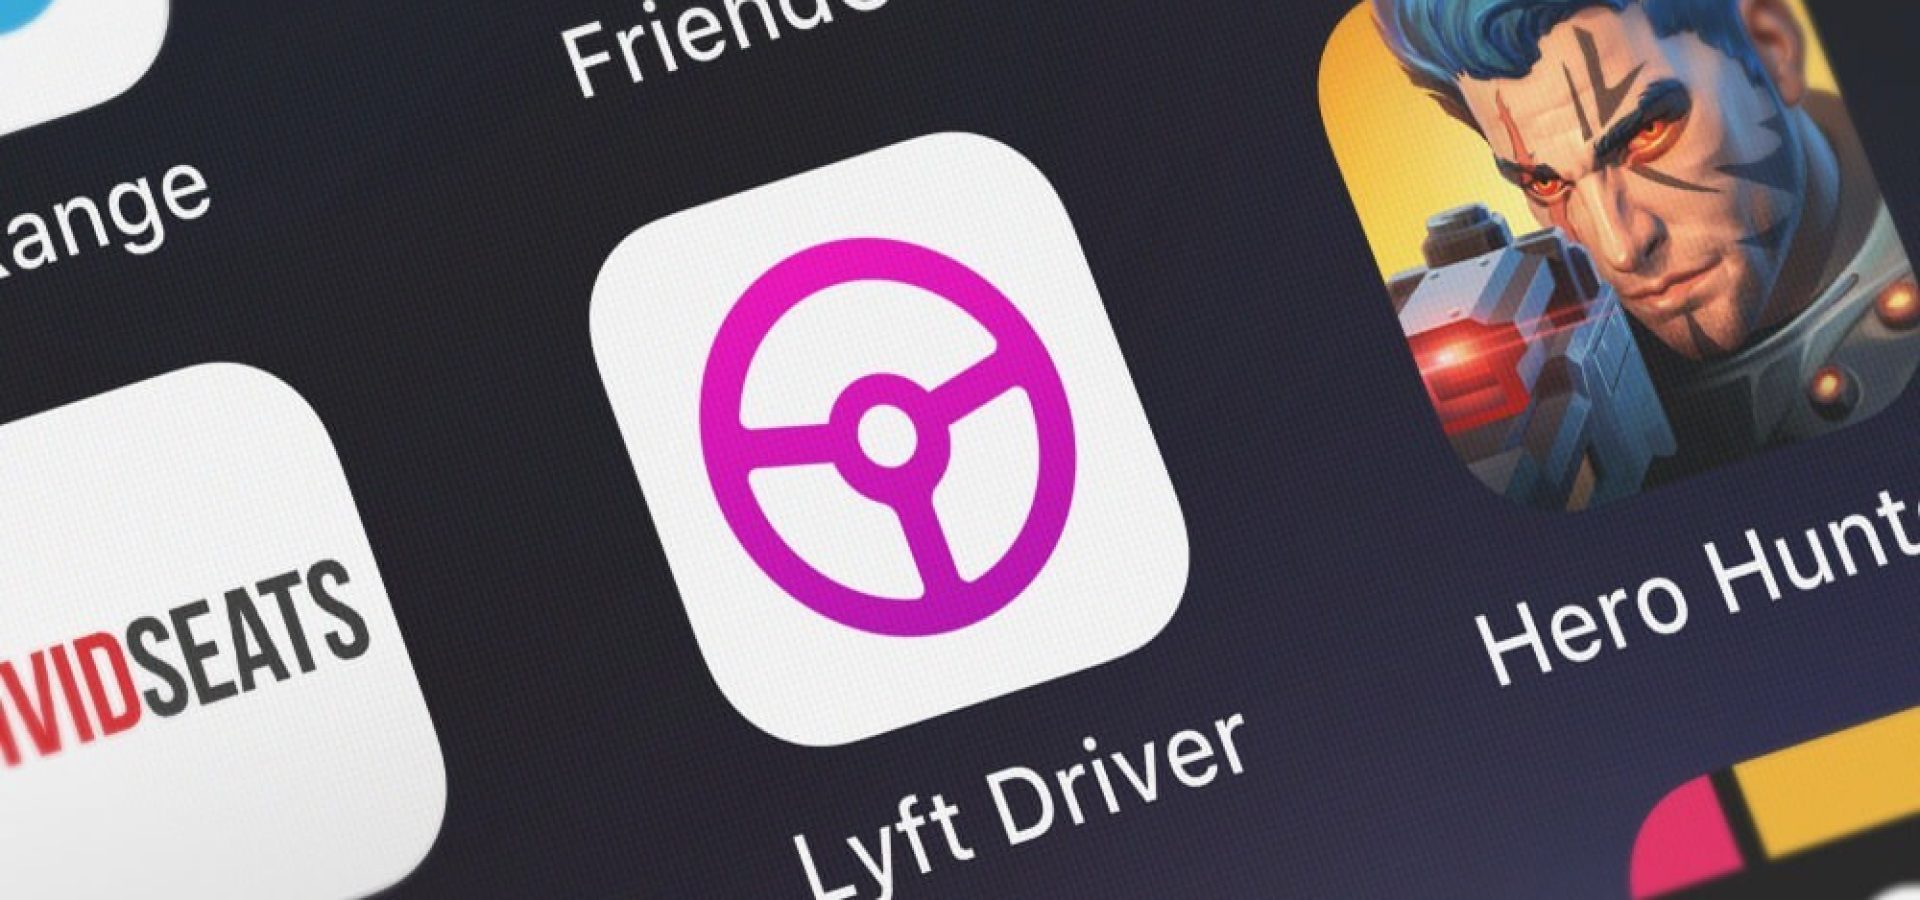 Ridesharing company Lyft and second-quarter earnings